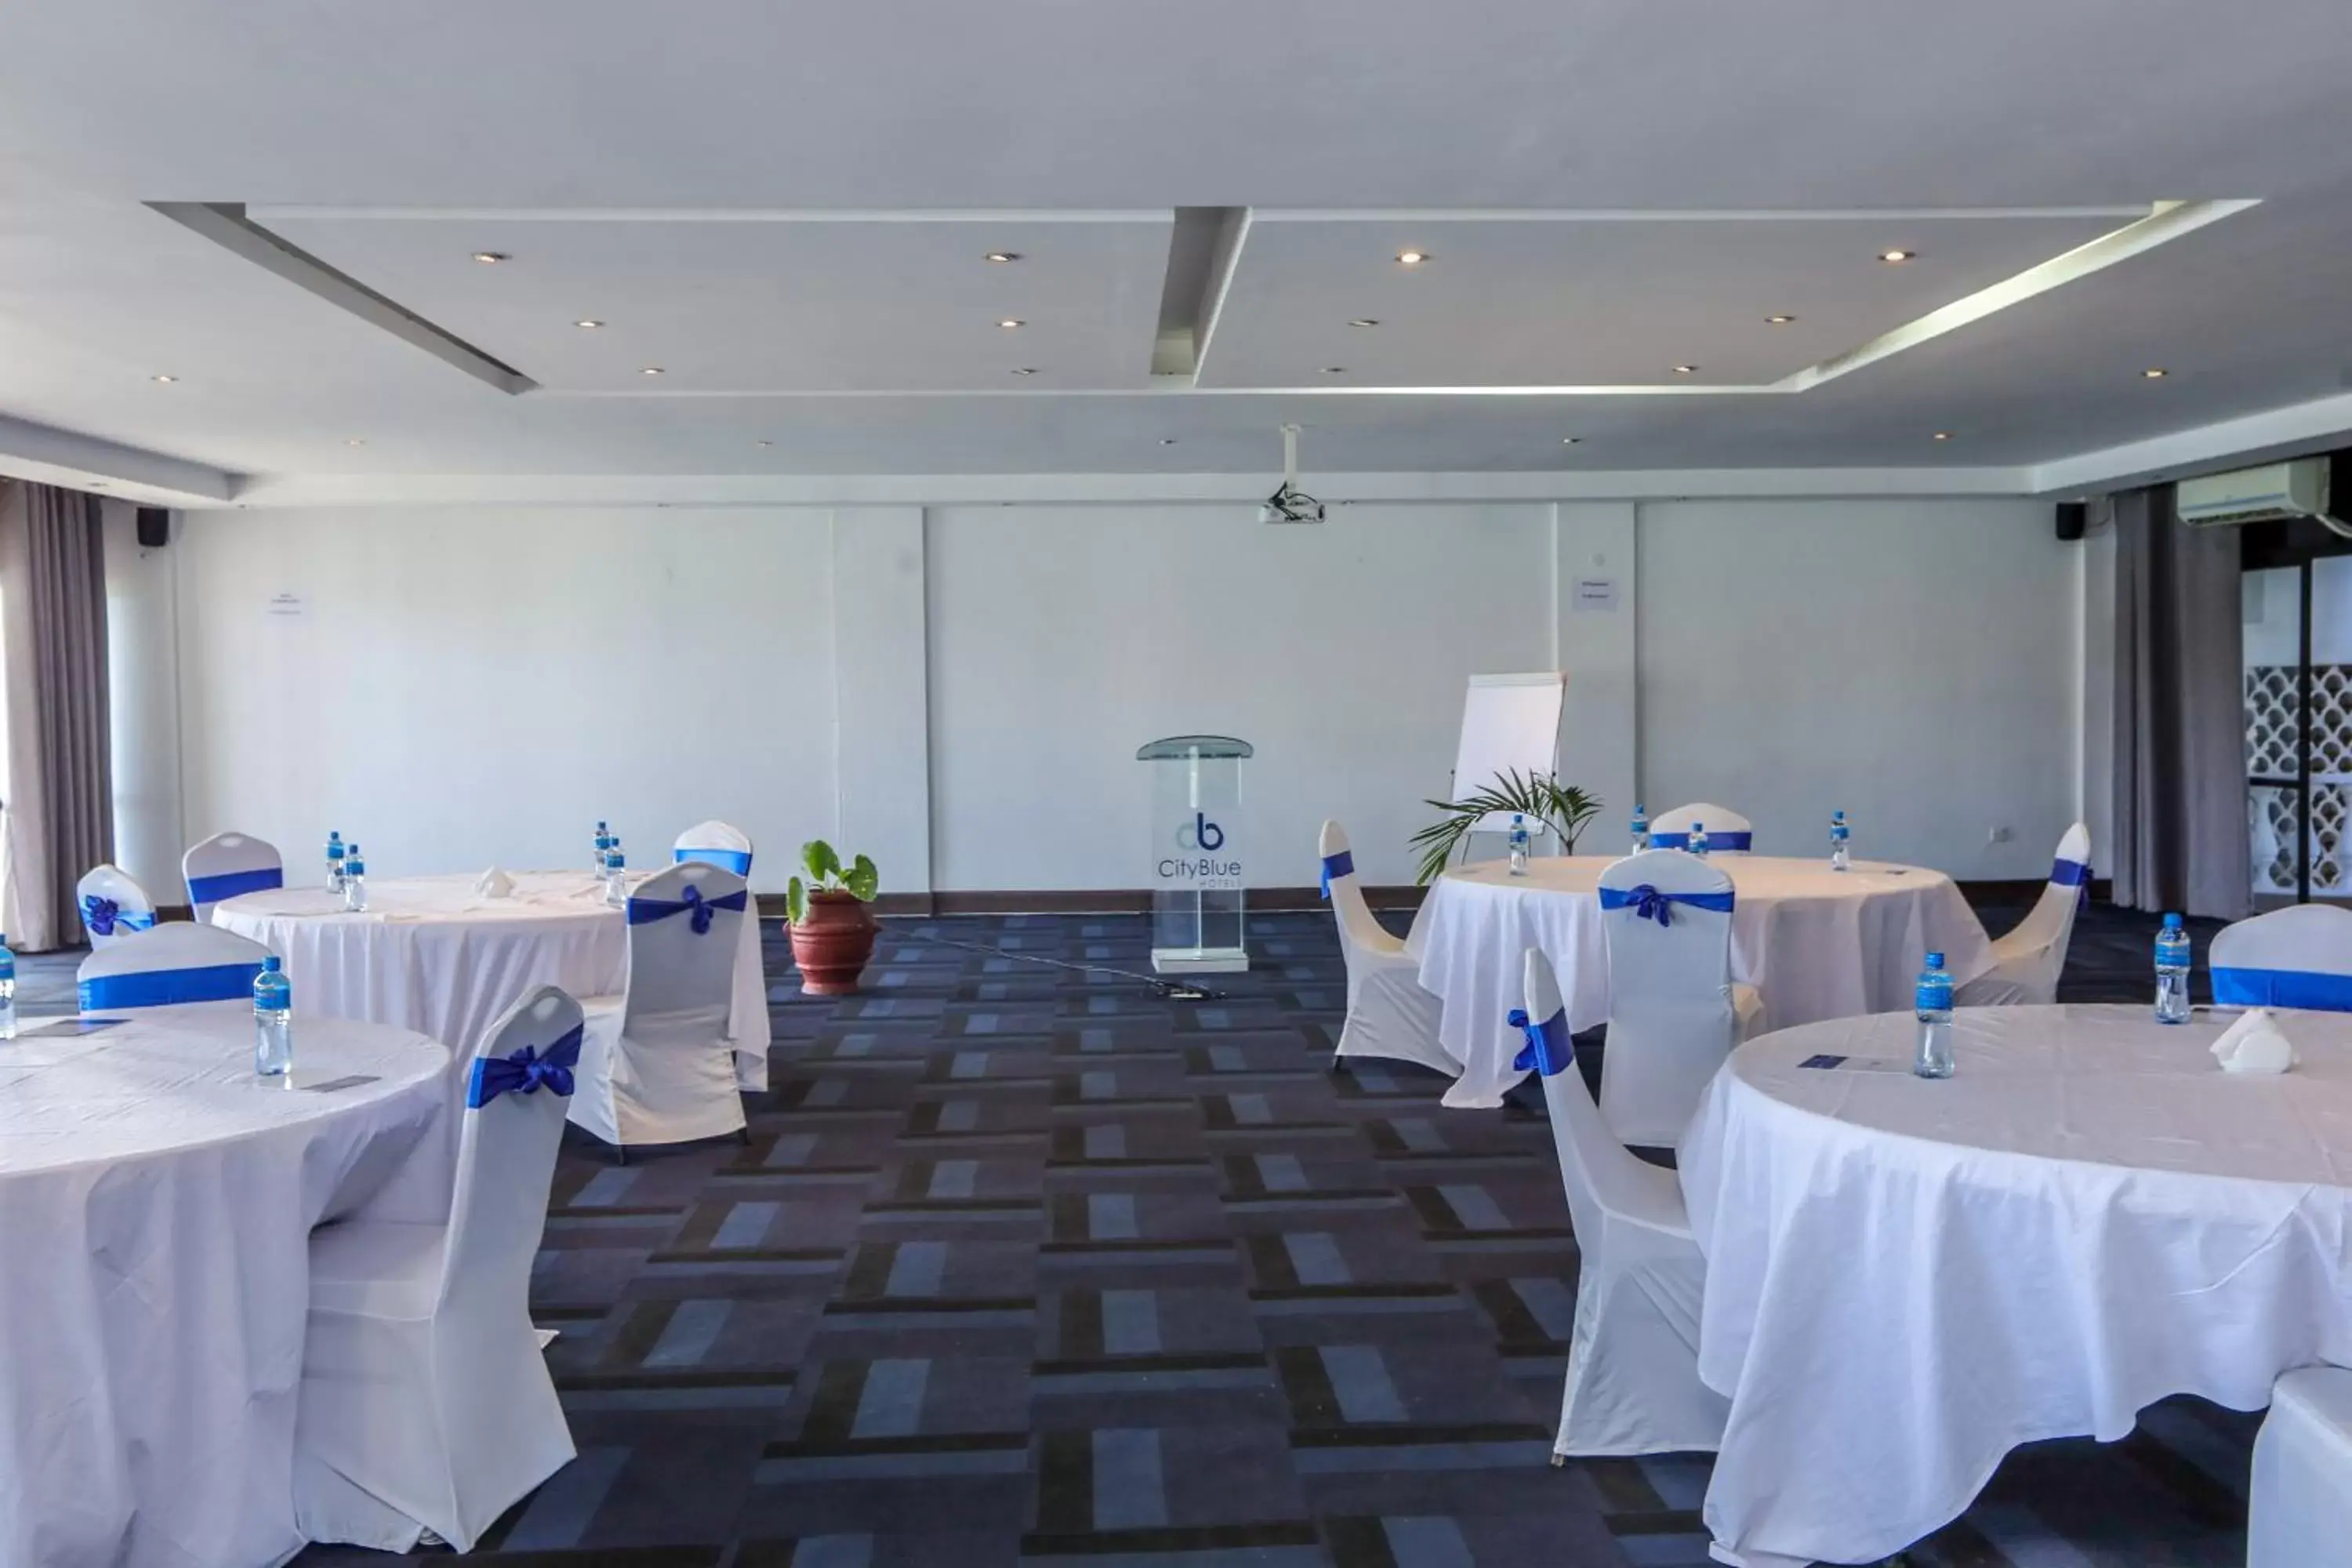 Meeting/conference room, Banquet Facilities in CityBlue Creekside Hotel & Suites